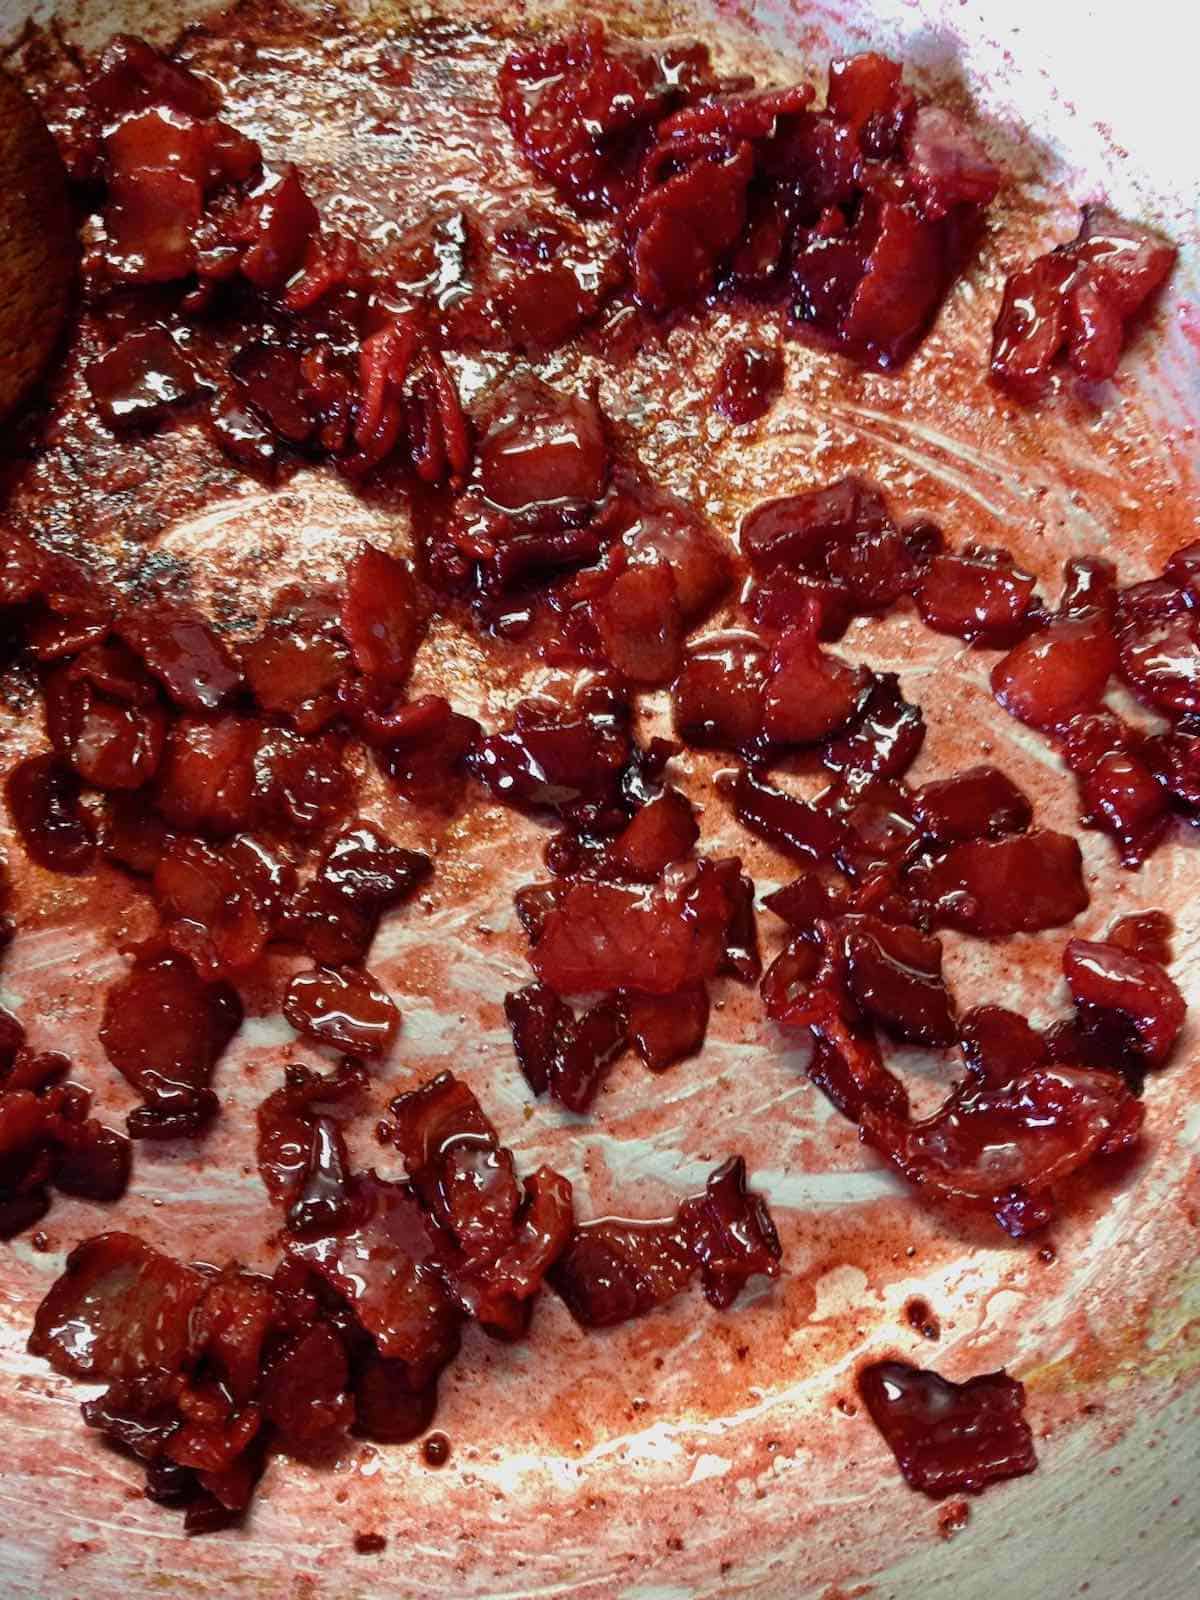 Asian candied bacon make happy food memories